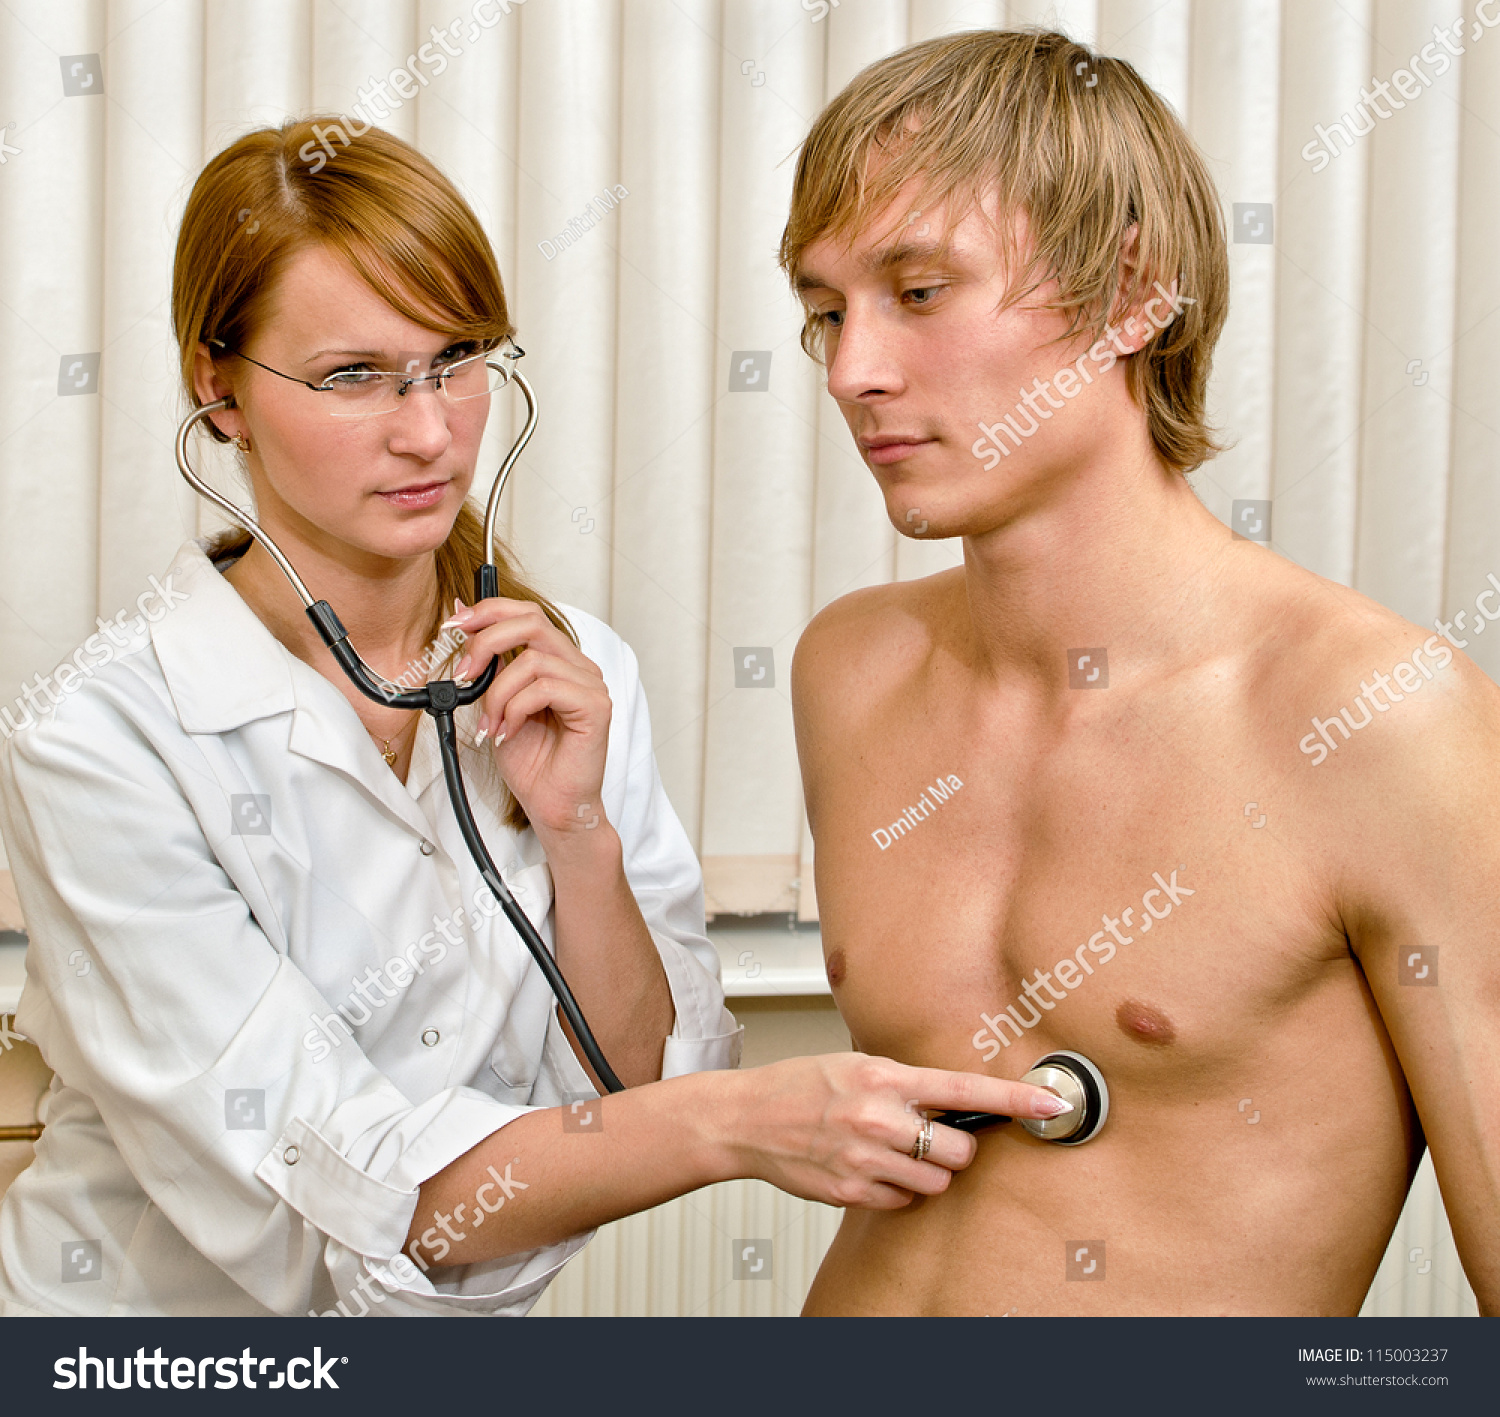 Young Female Doctor Examine Male Patient Stock Photo 1150